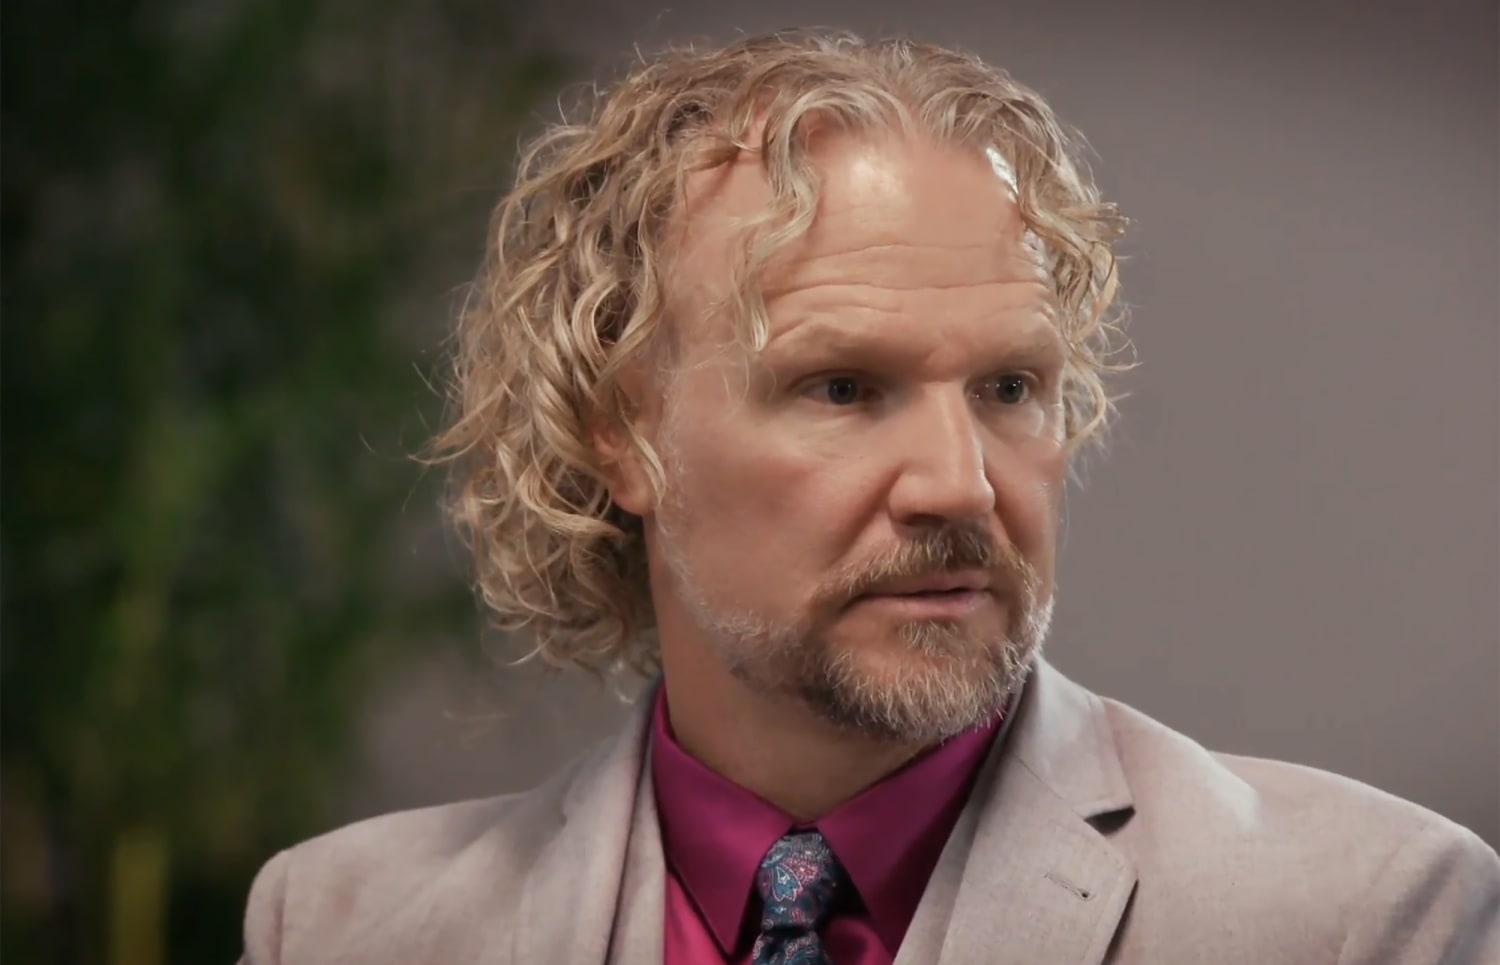 Sister Wives Star Kody Brown Has Regrets About Estrangement From Sons